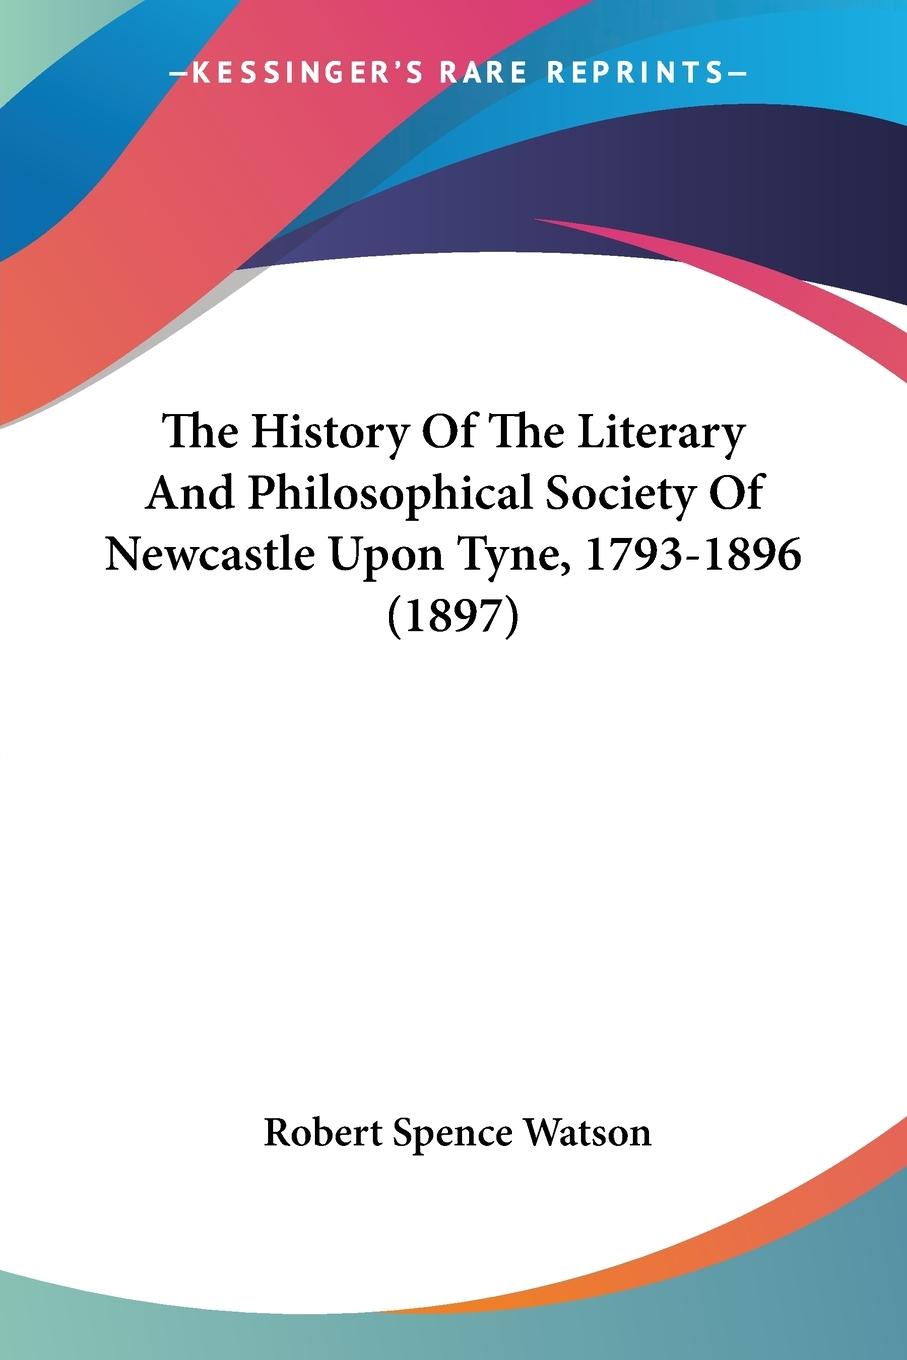 The History Of The Literary And Philosophical Society Of Newcastle Upon Tyne, 1793-1896 (1897) - Watson, Robert Spence